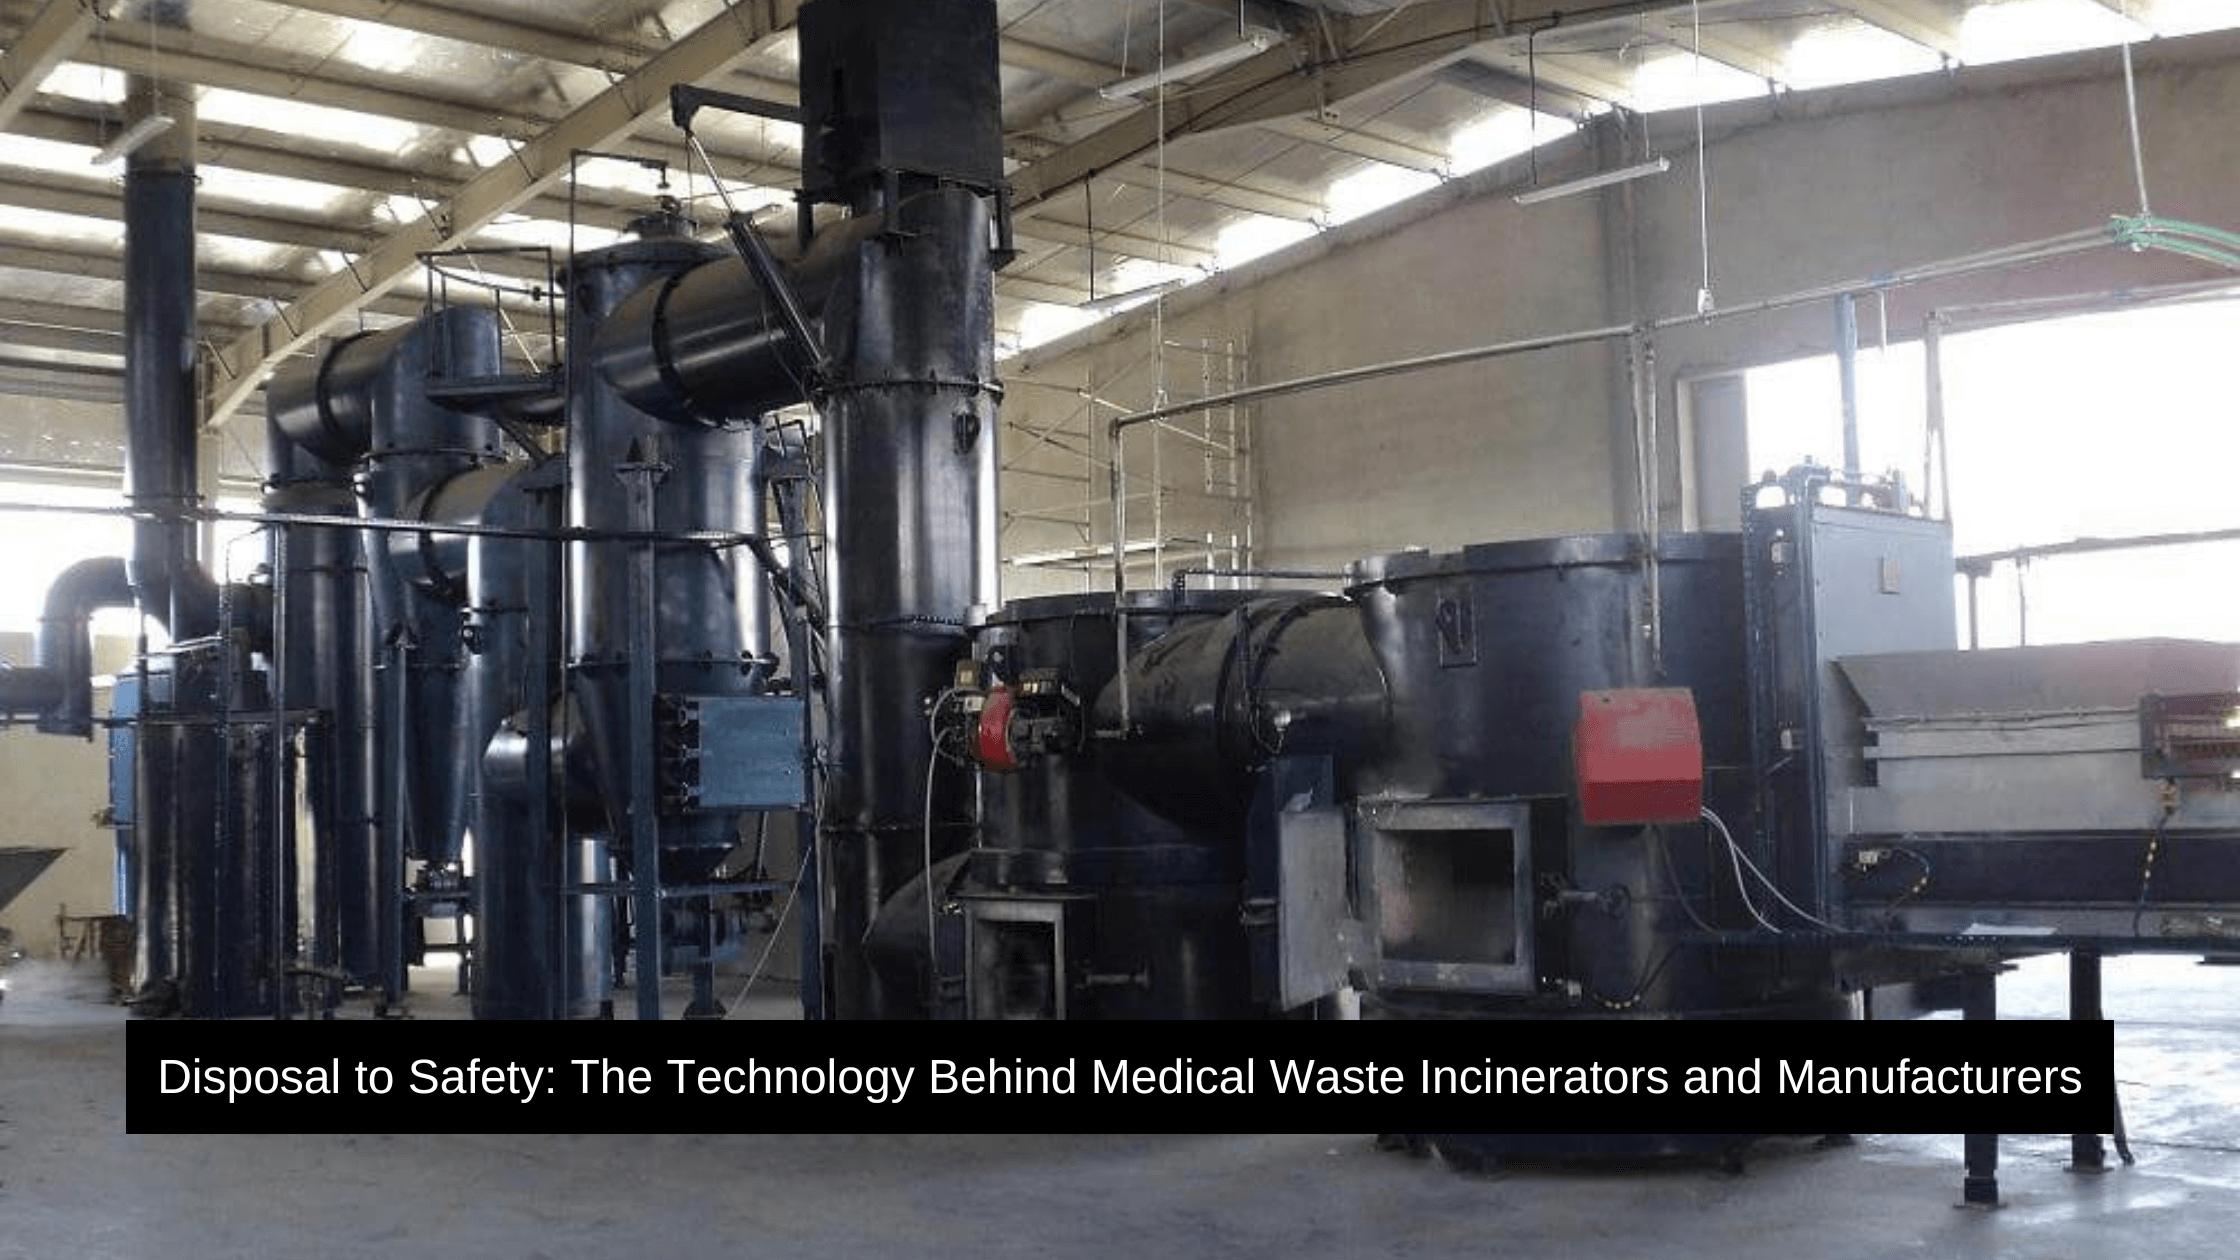 Disposal to Safety: The Technology Behind Medical Waste Incinerators and Manufacturers